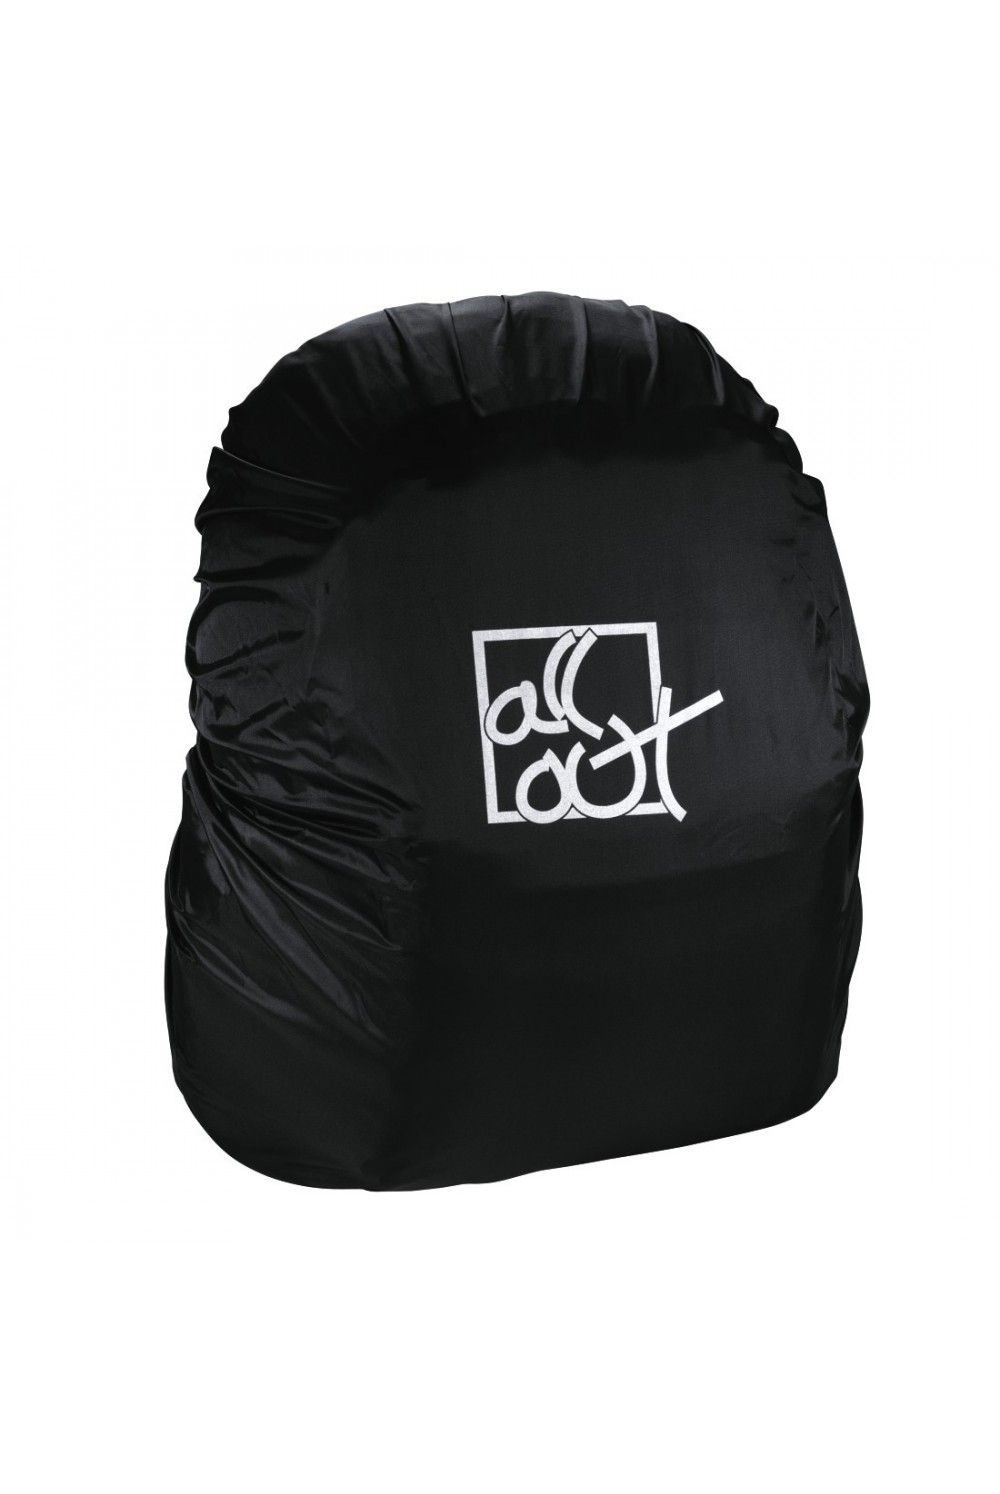 All Out Rain cover for backpacks